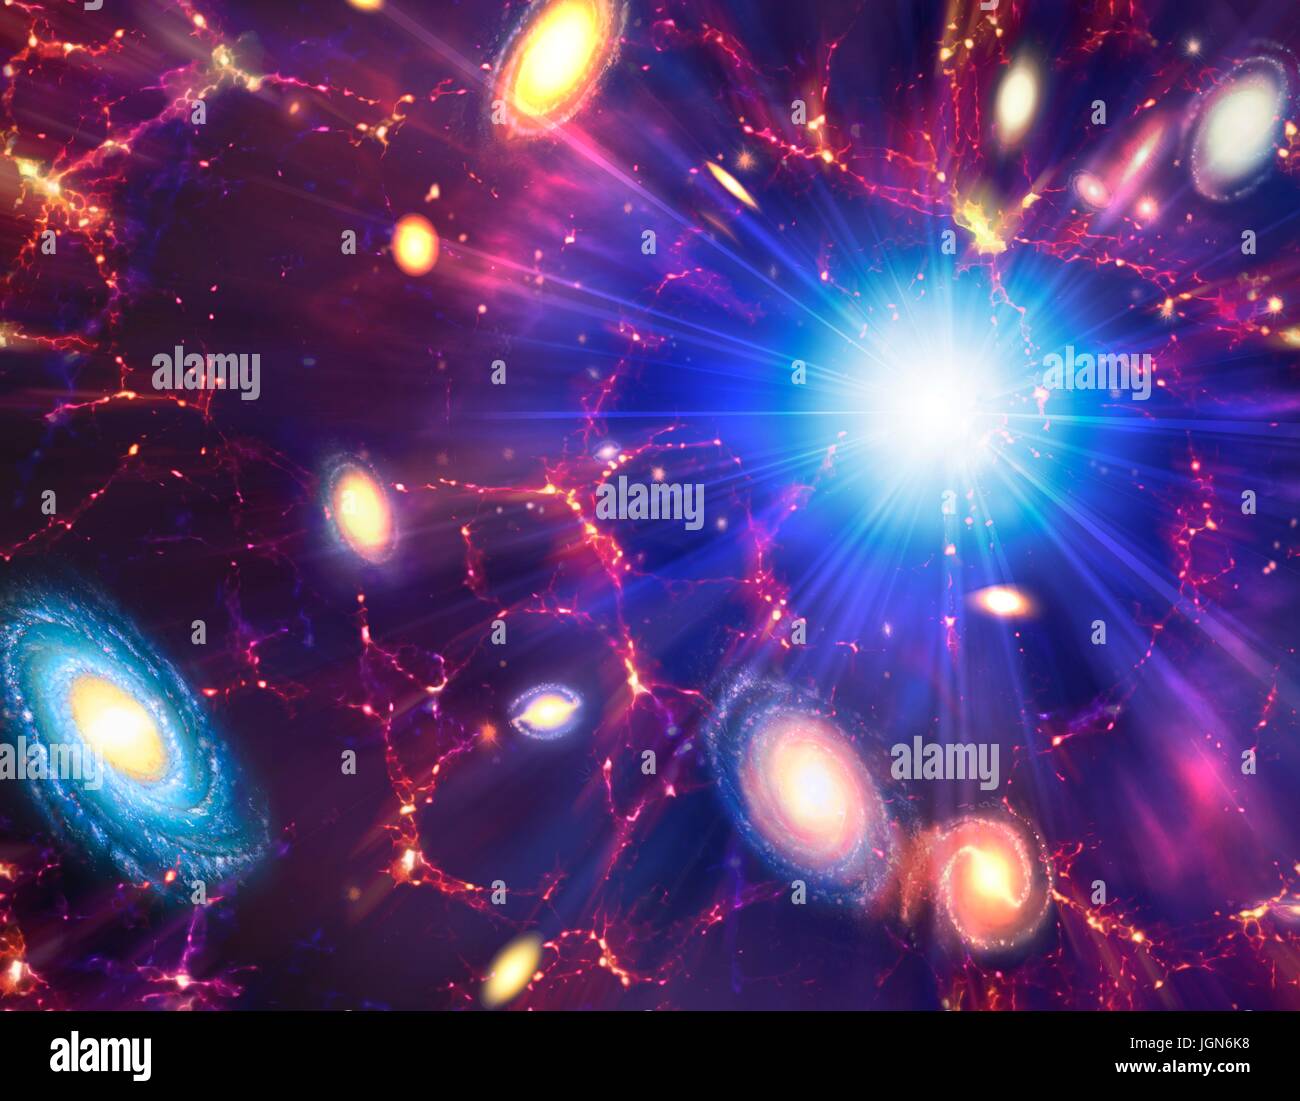 Big Bang, conceptual image. Computer illustration representing the origin of the universe. The term Big Bang describes the initial expansion of all the matter in the universe from an infinitely compact state 13.7 billion years ago. The initial conditions are not known, but less than a second after the beginning, temperatures were trillions of degrees Celsius and the primordial universe was much smaller than an atom. It has been expanding and cooling ever since. Matter formed and coalesced into the galaxies, which are observed to be moving away from each other. Stock Photo